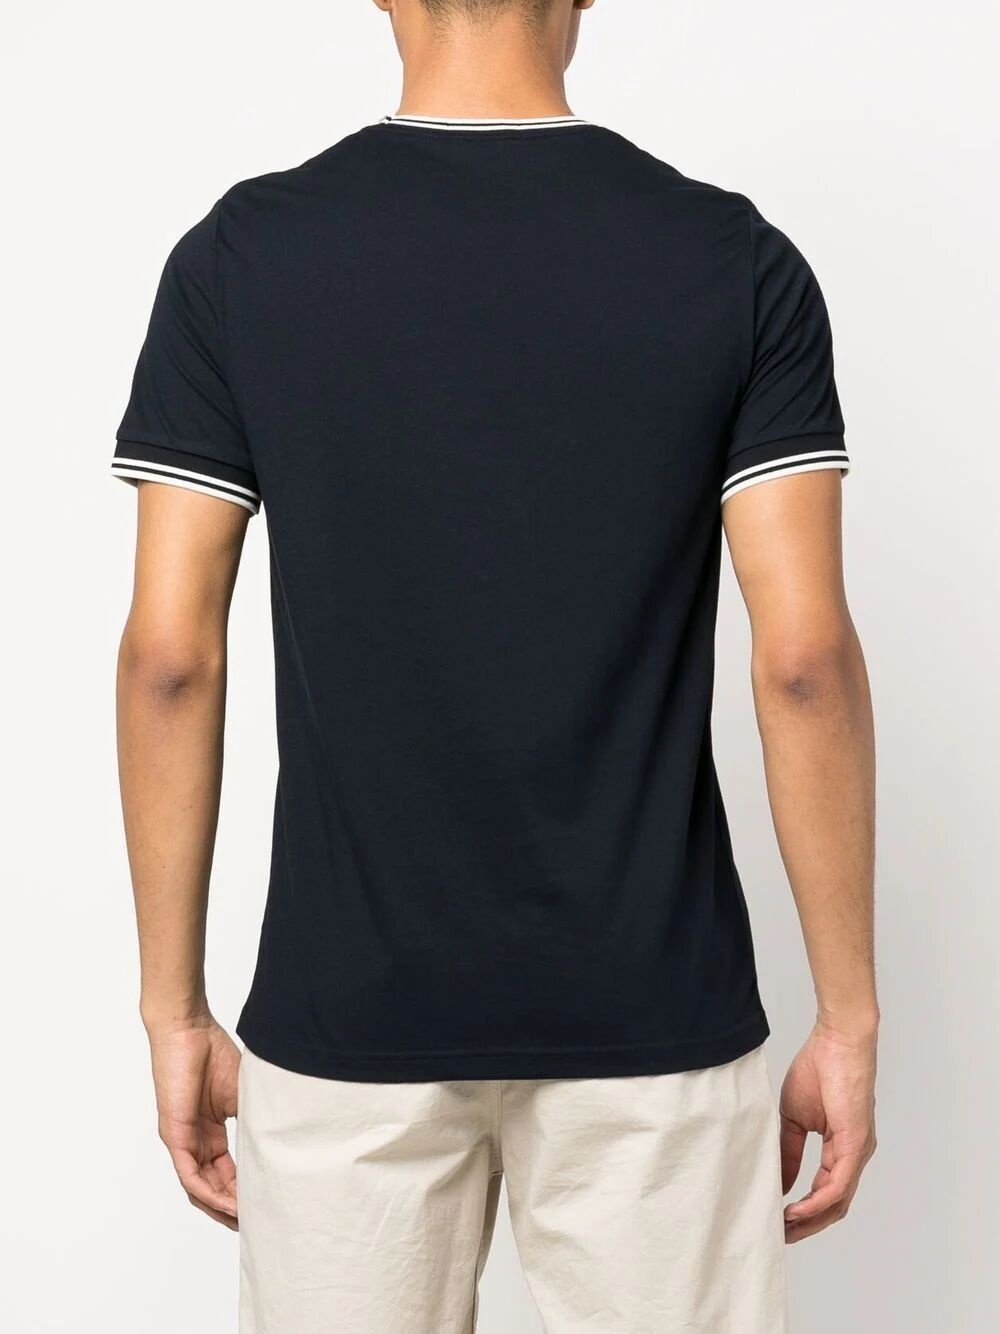 FP TWIN TIPPED T-SHIRT - 2